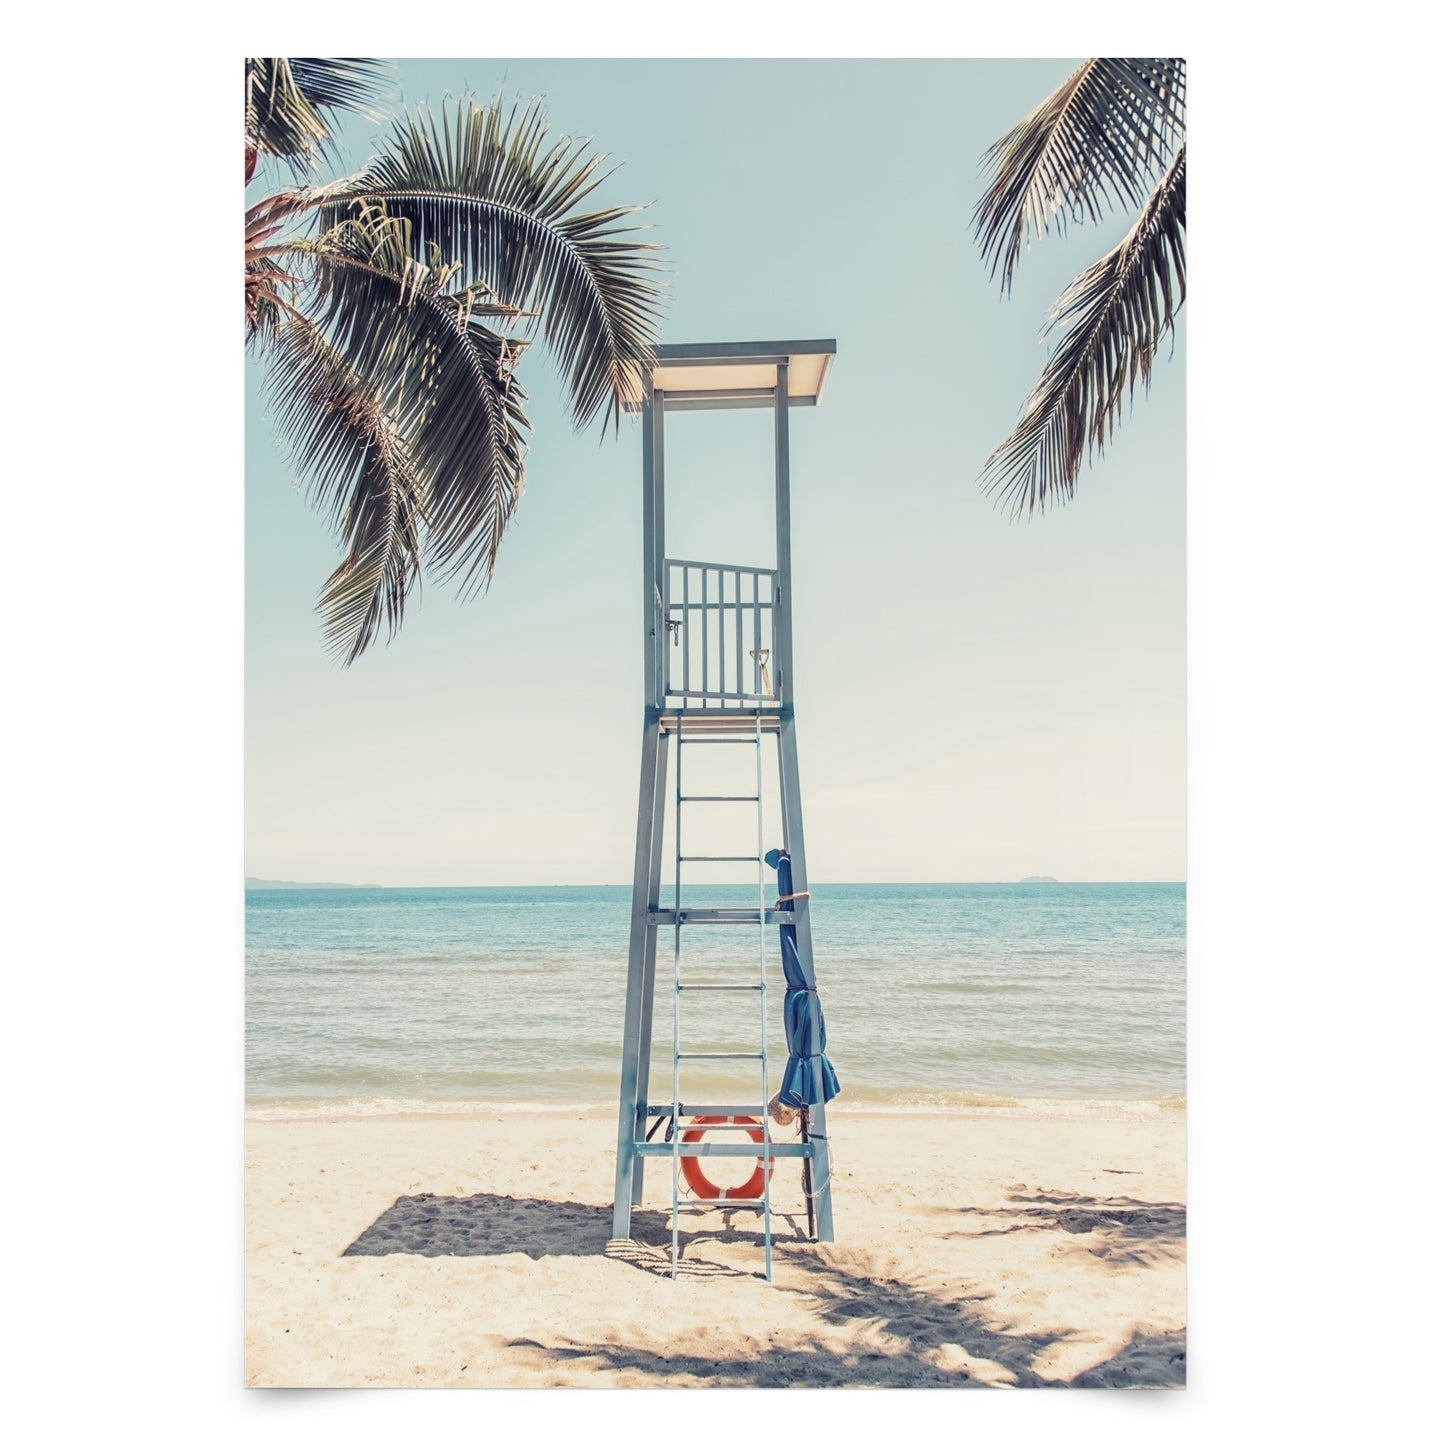 Lifeguard Stand by Manjik Pictures - Art Print